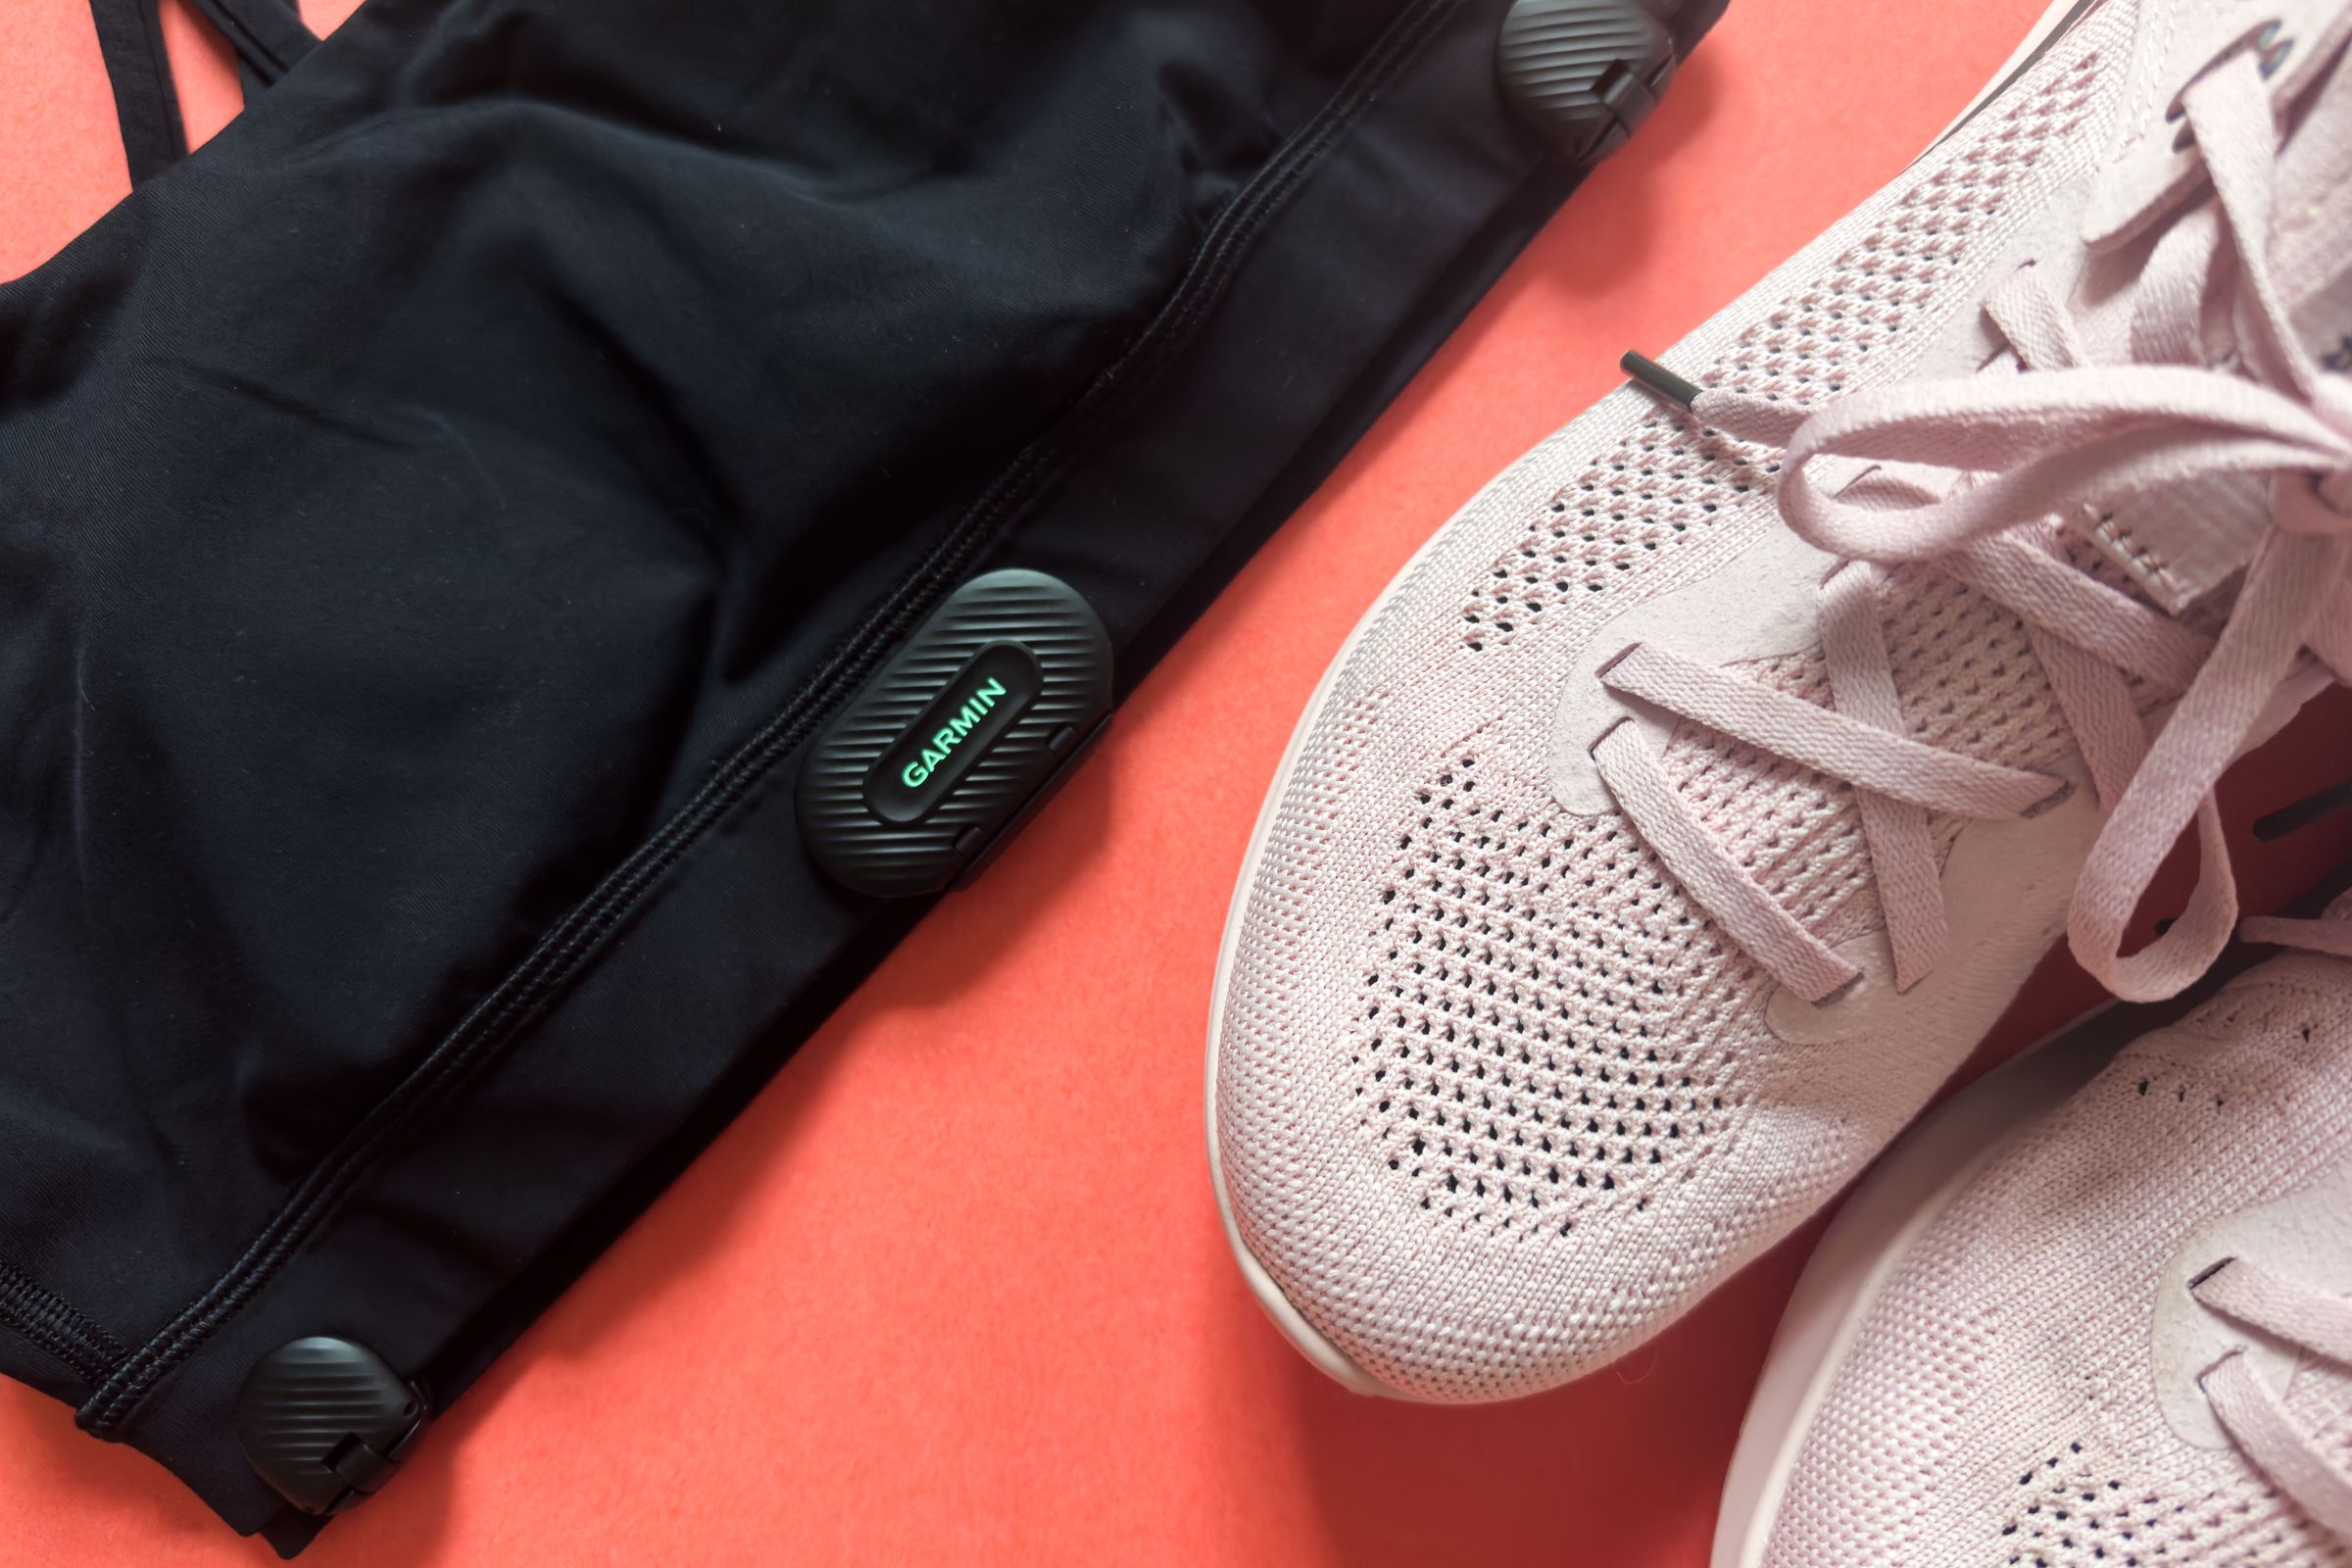 Garmin HRM-Fit on a sports bra next to some sneakers